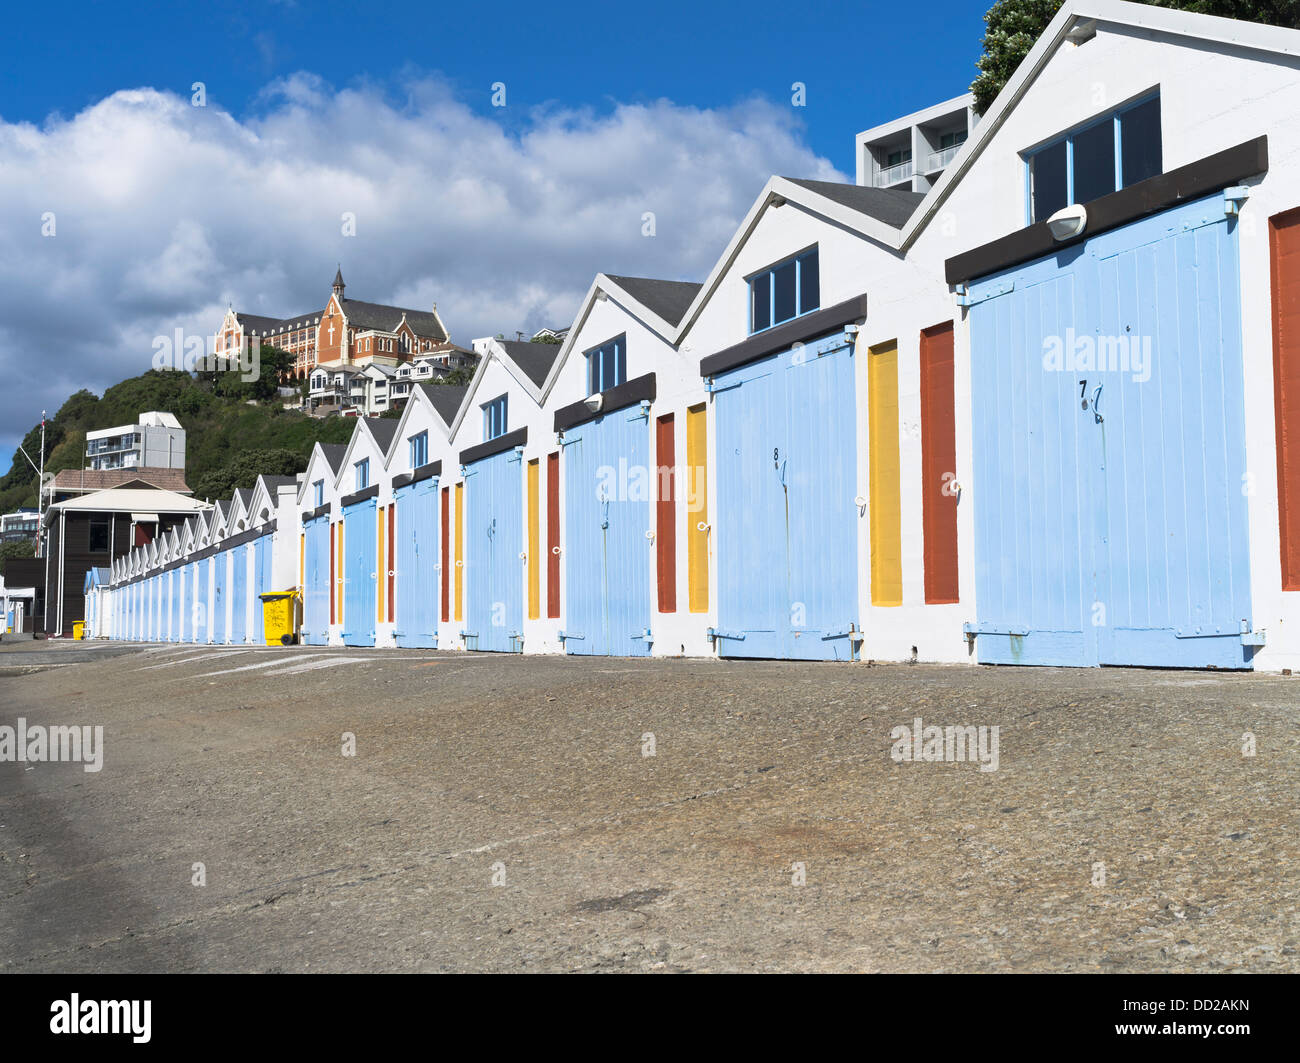 dh Lambton Harbour WELLINGTON NEW ZEALAND Colourful boatshed doors Clyde Quay Marina St Gerards Monastery Stock Photo